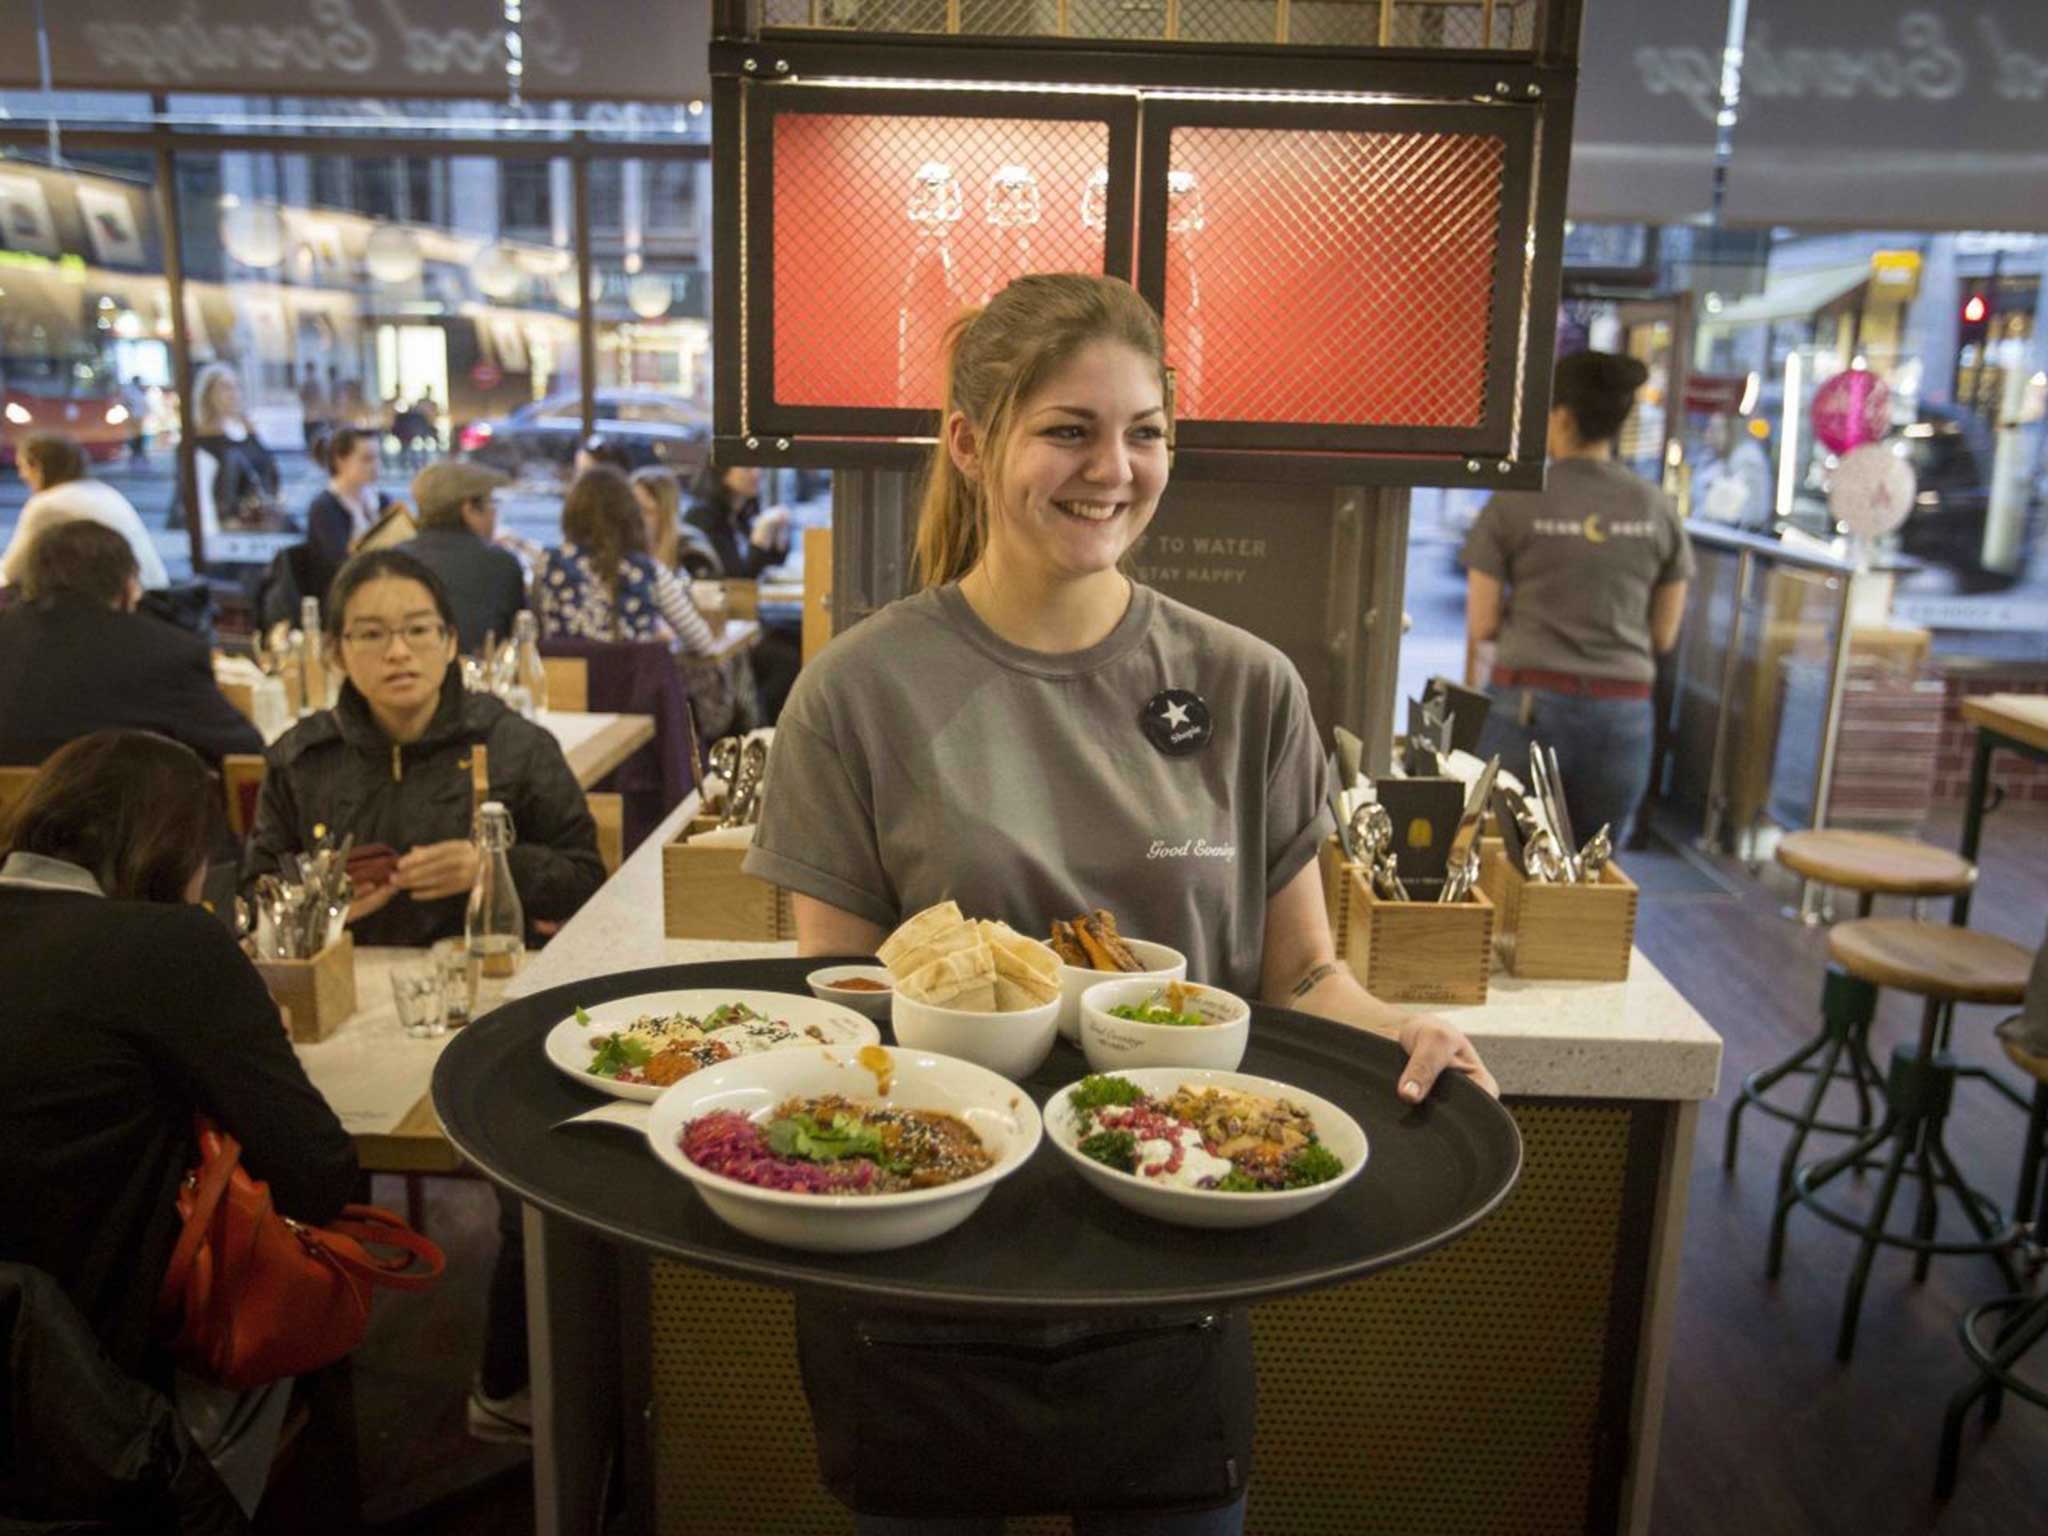 Waiter service for diners begins at 6pm with Pret A Manger’s new ‘Good Evenings’ menu, at its Strand branch in London